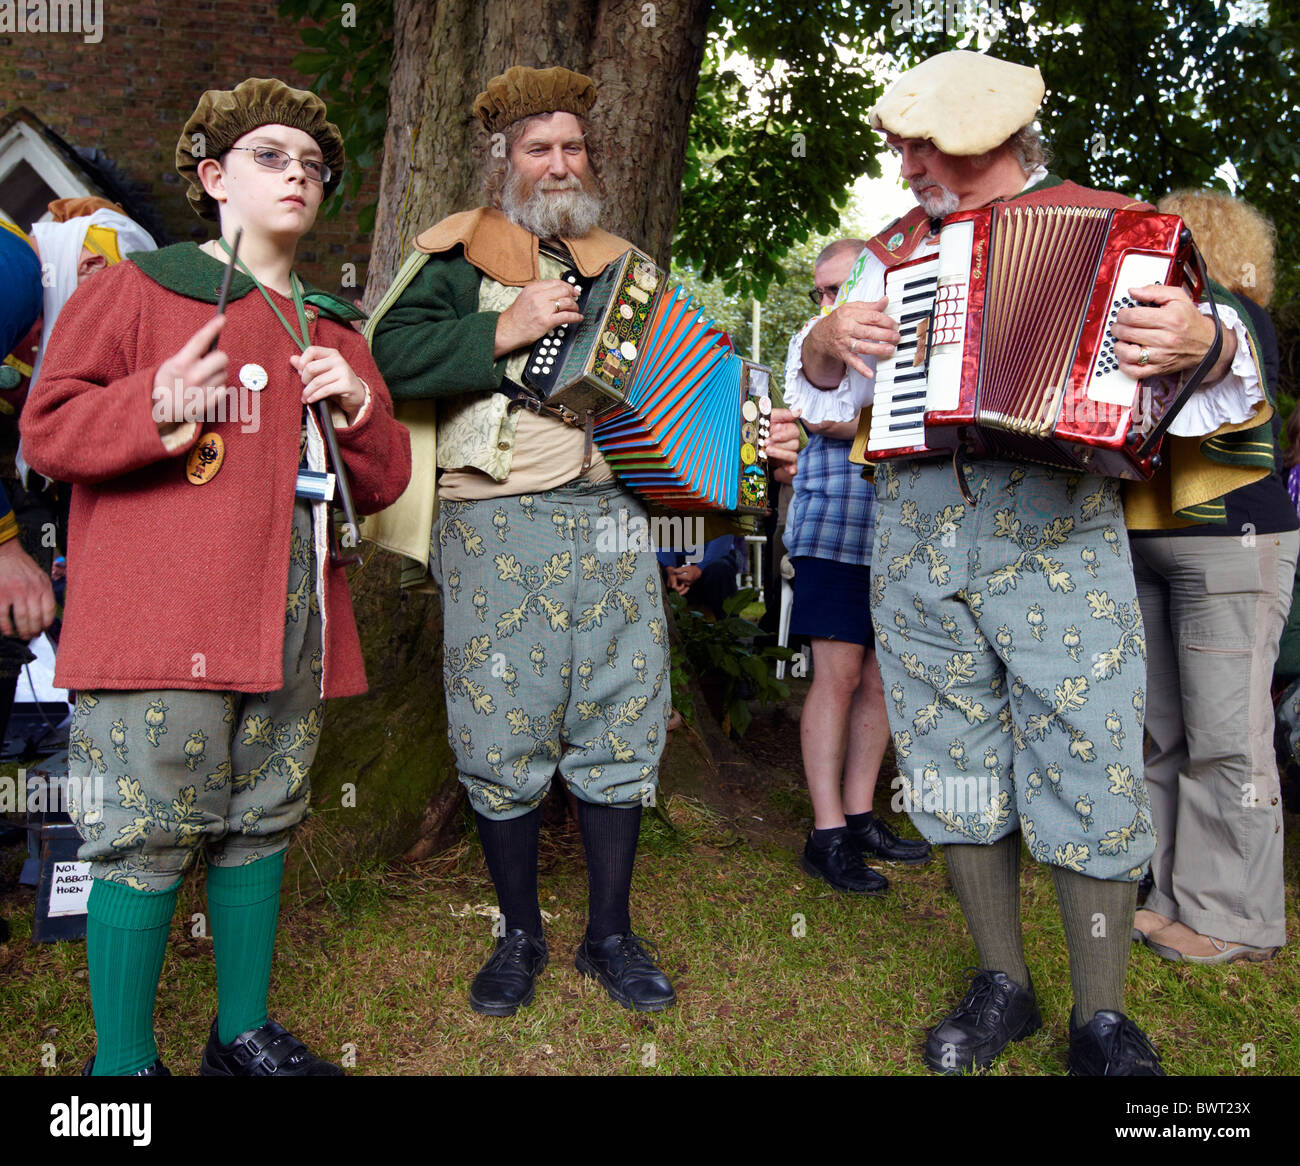 Accordion Players At The Abbots Bromley Horn Dance Staffordshire UK Europe Stock Photo